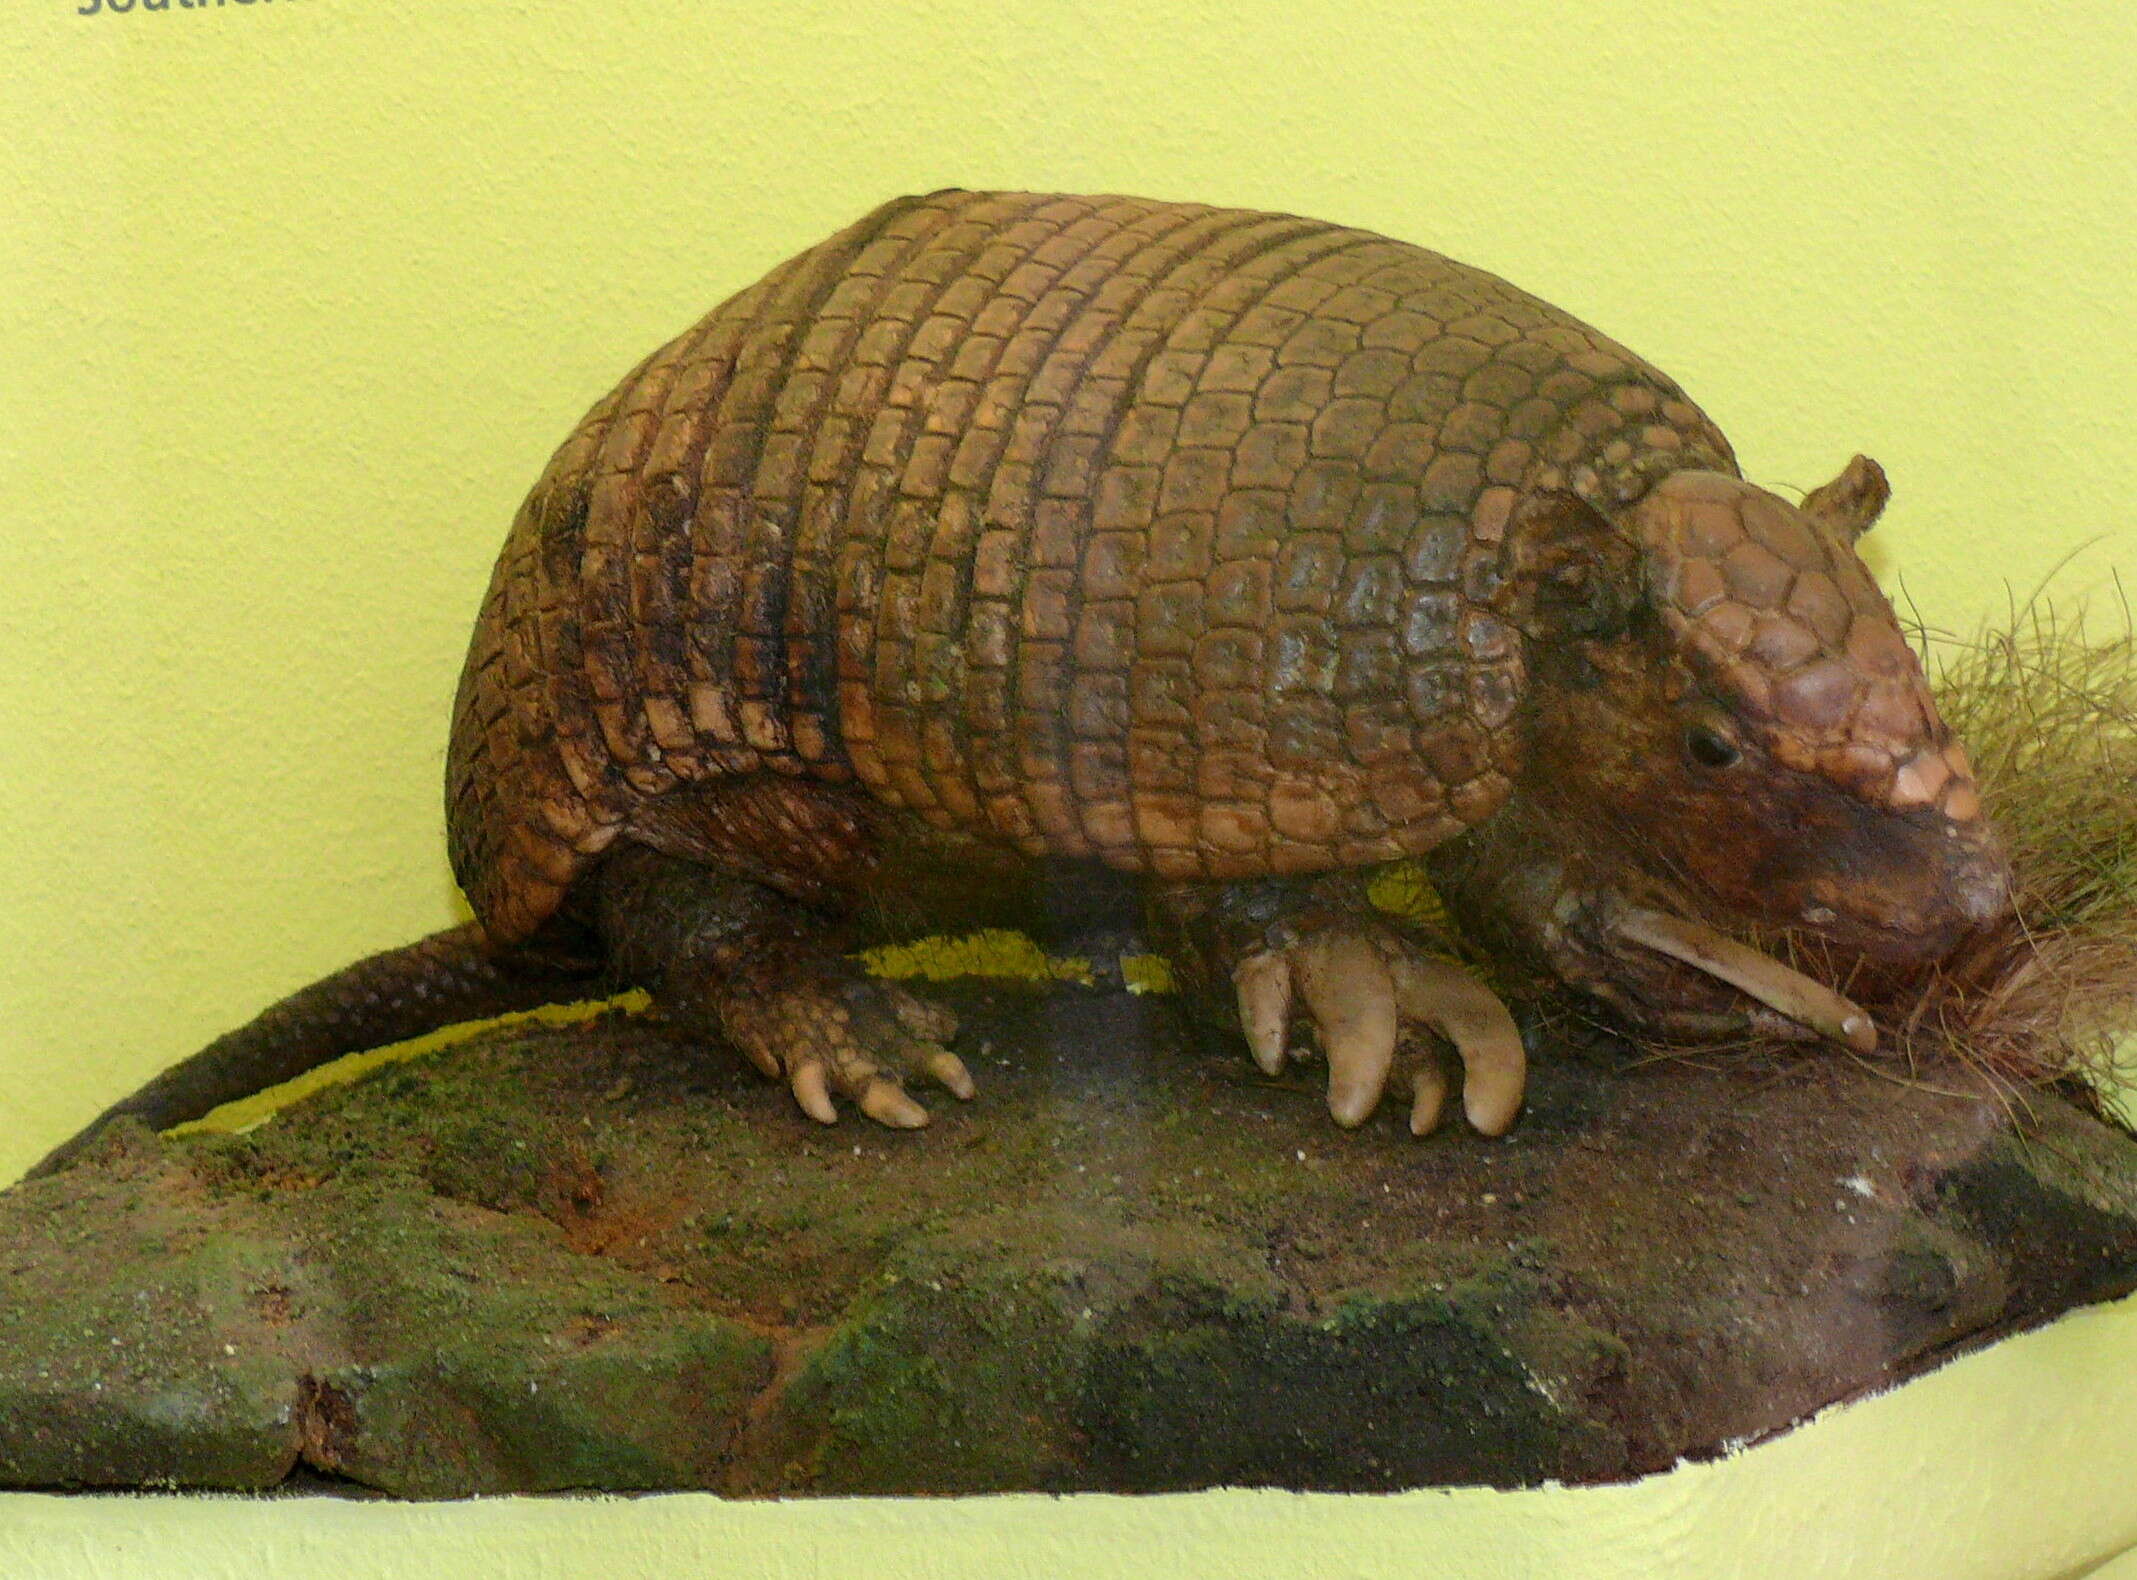 Image of Southern Naked-Tailed Armadillo